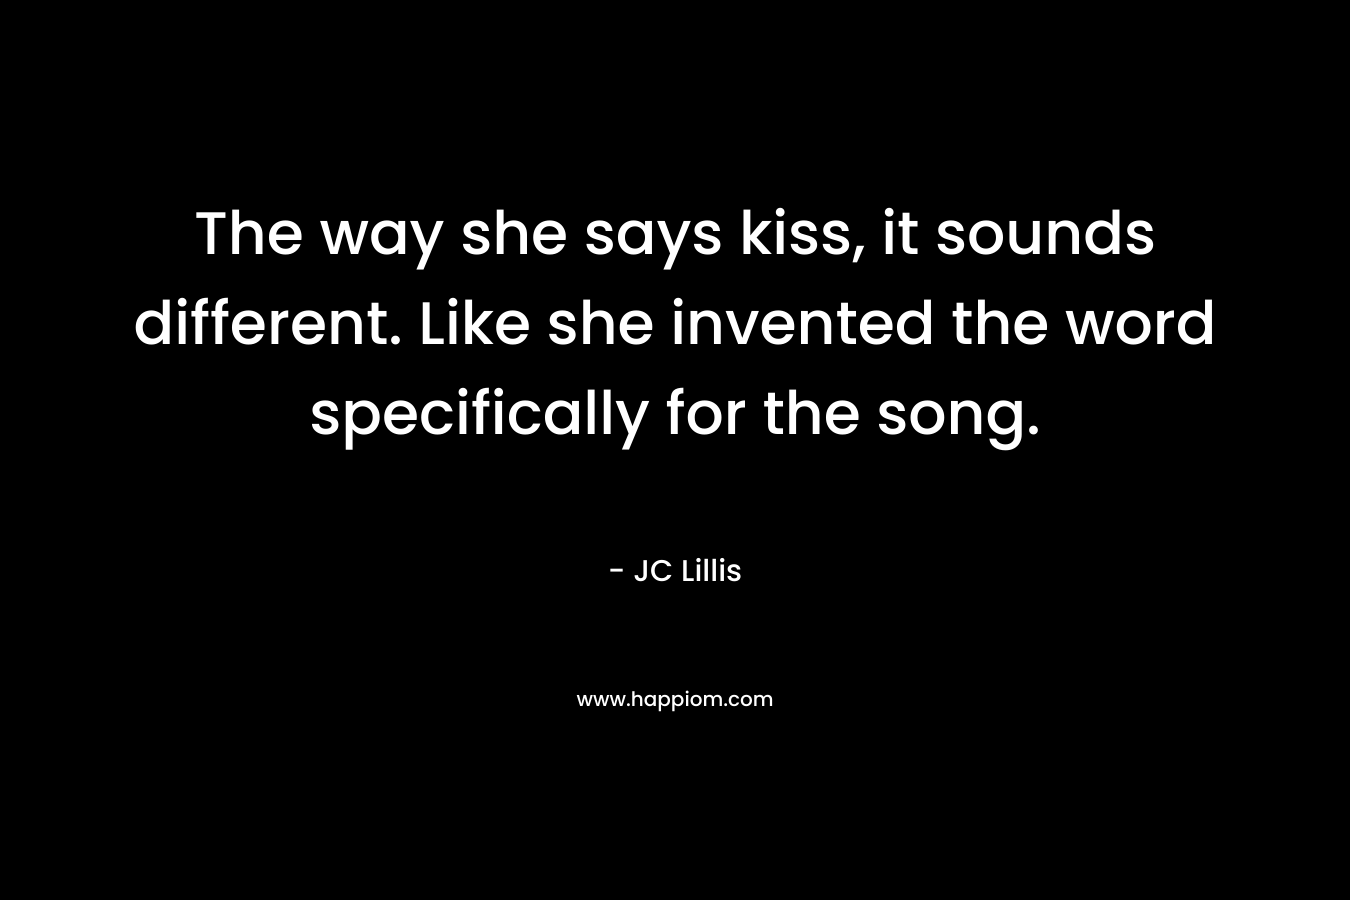 The way she says kiss, it sounds different. Like she invented the word specifically for the song. – JC Lillis